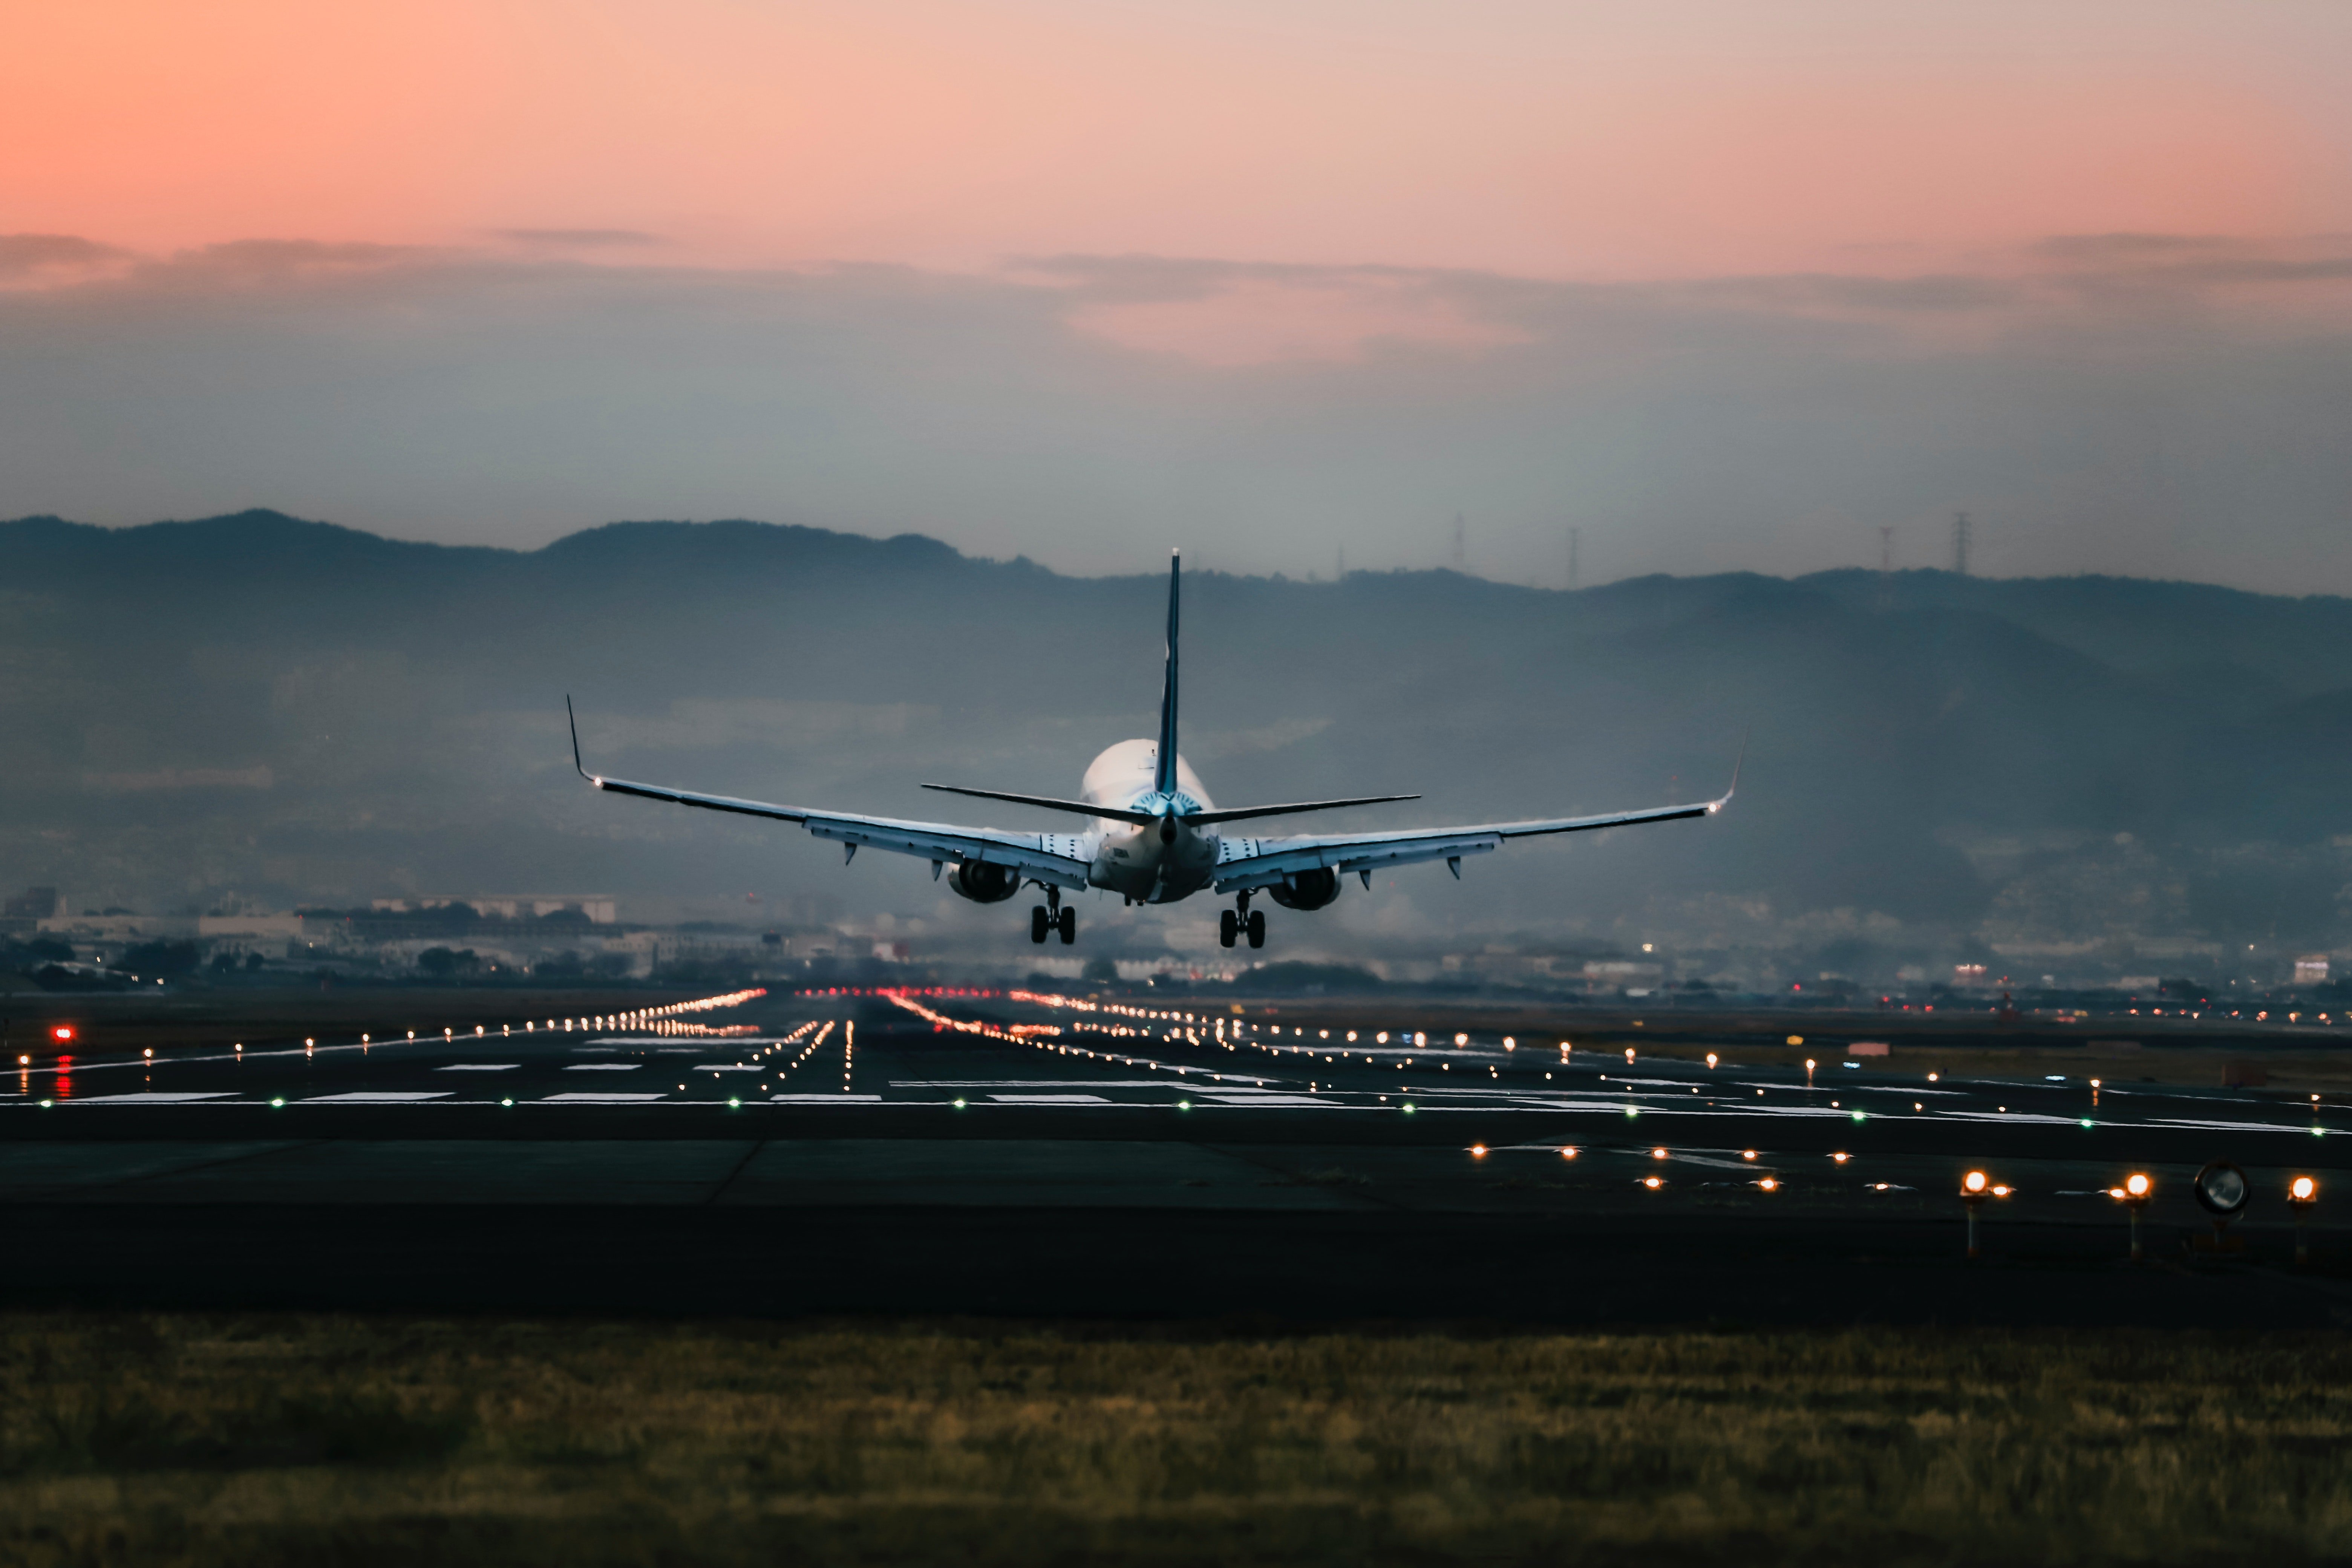 The impact from the plane's rough landing left OP's dad bedridden for several days. | Source: Pexels